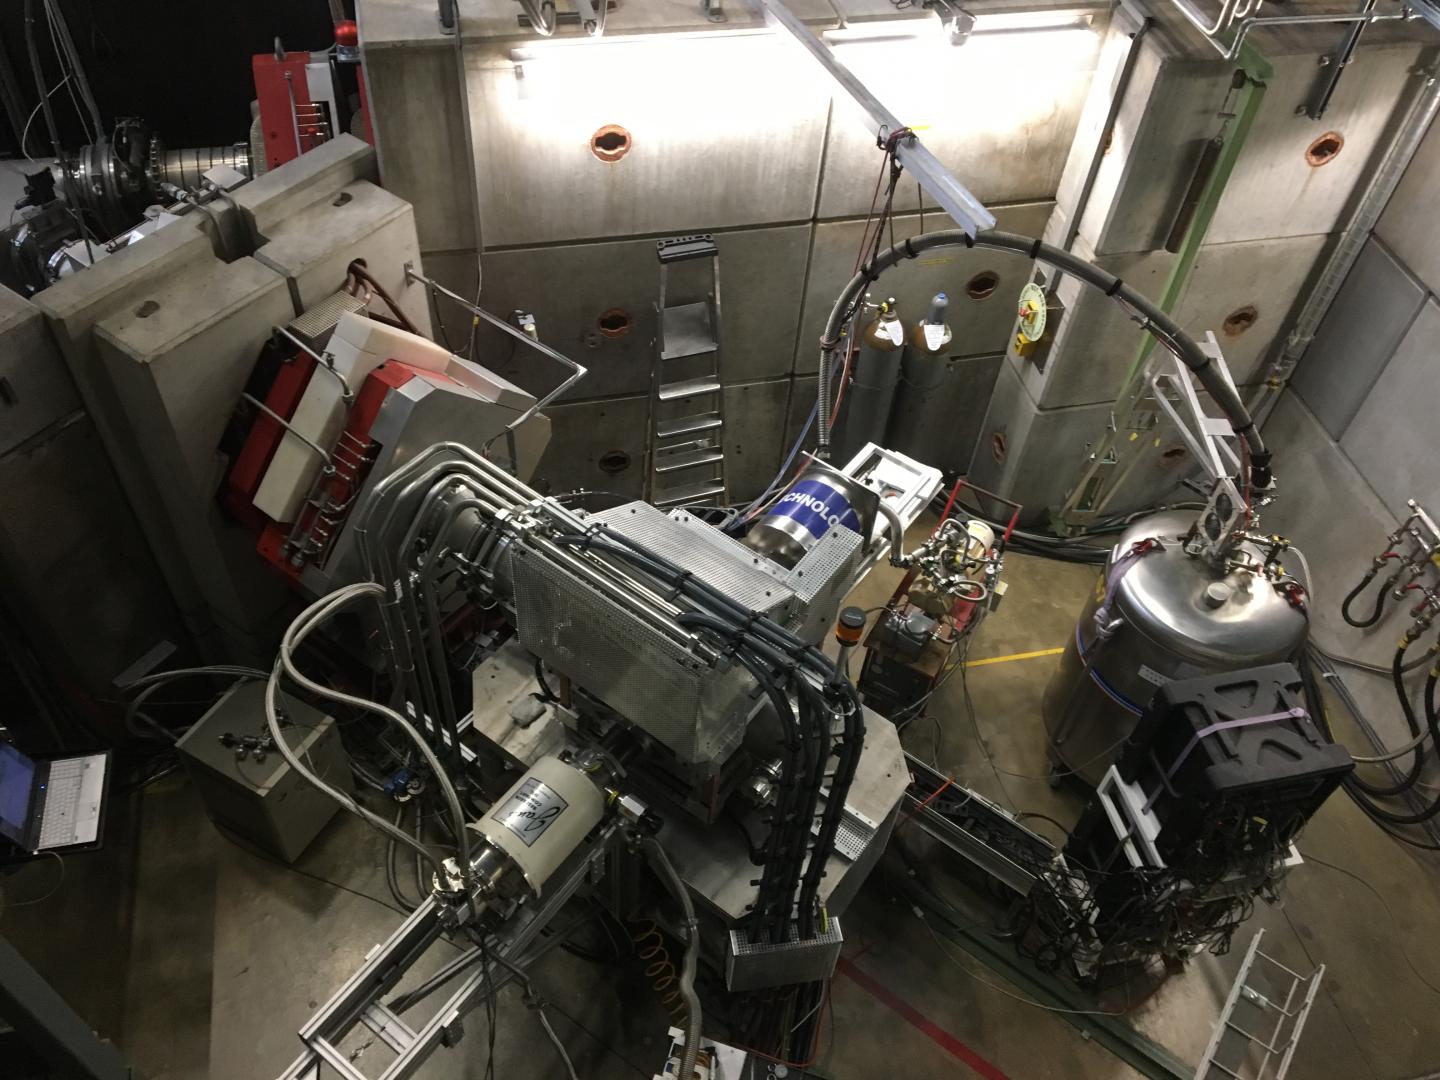 The Muon Spin Spectrometer